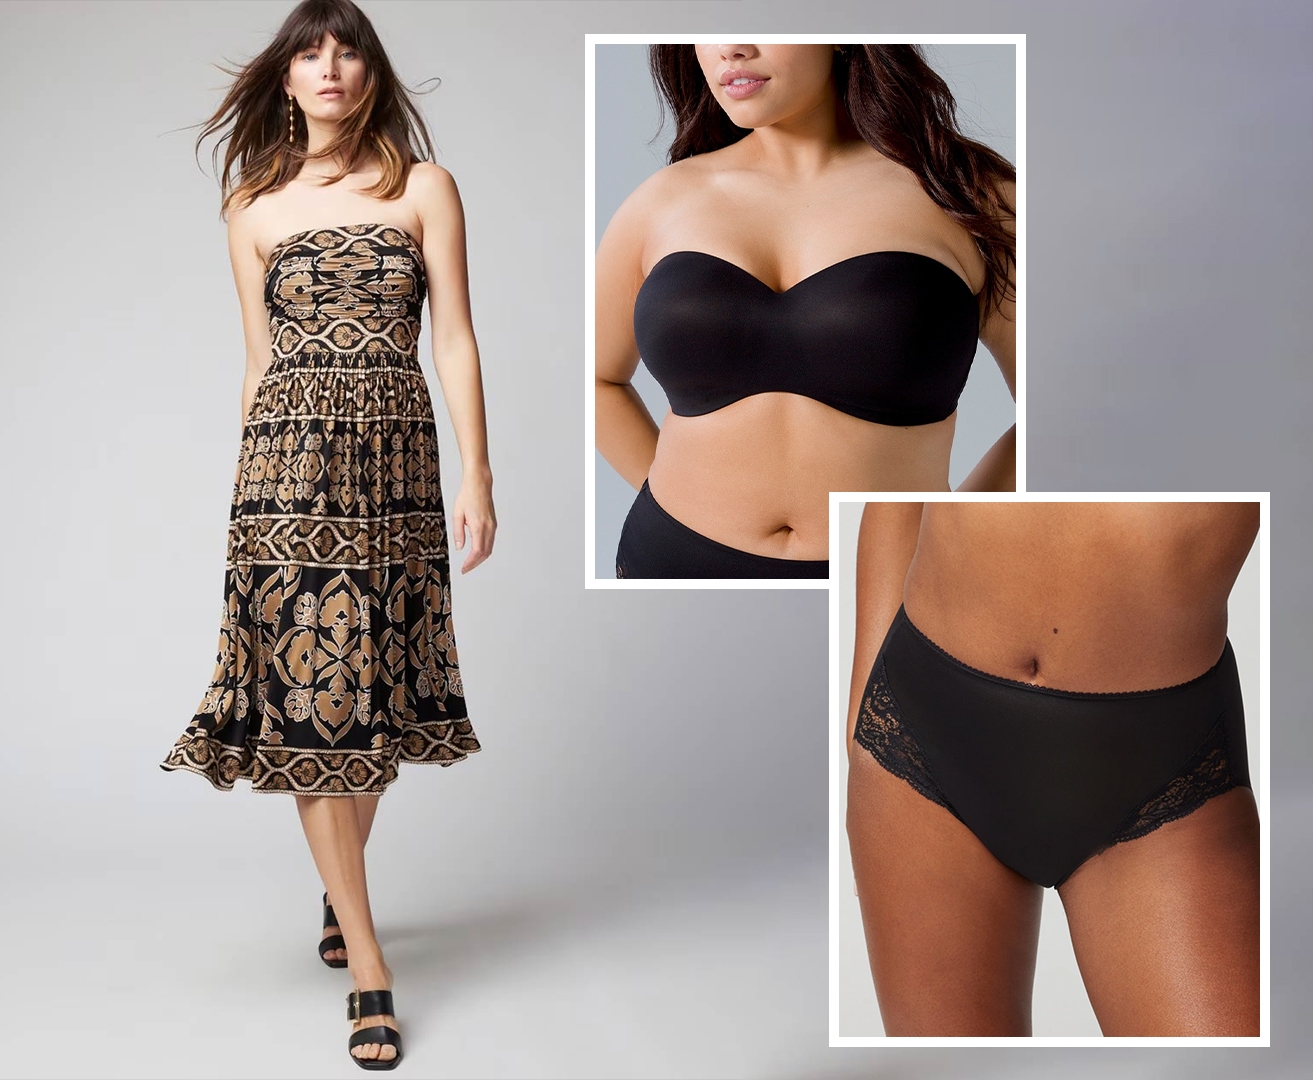 White House Black Market<sup class=st-superscript>®</sup> women’s model wearing a brown printed strapless dress and black heels. Featuring Soma<sup class=st-superscript>®</sup> black strapless bra and briefs.